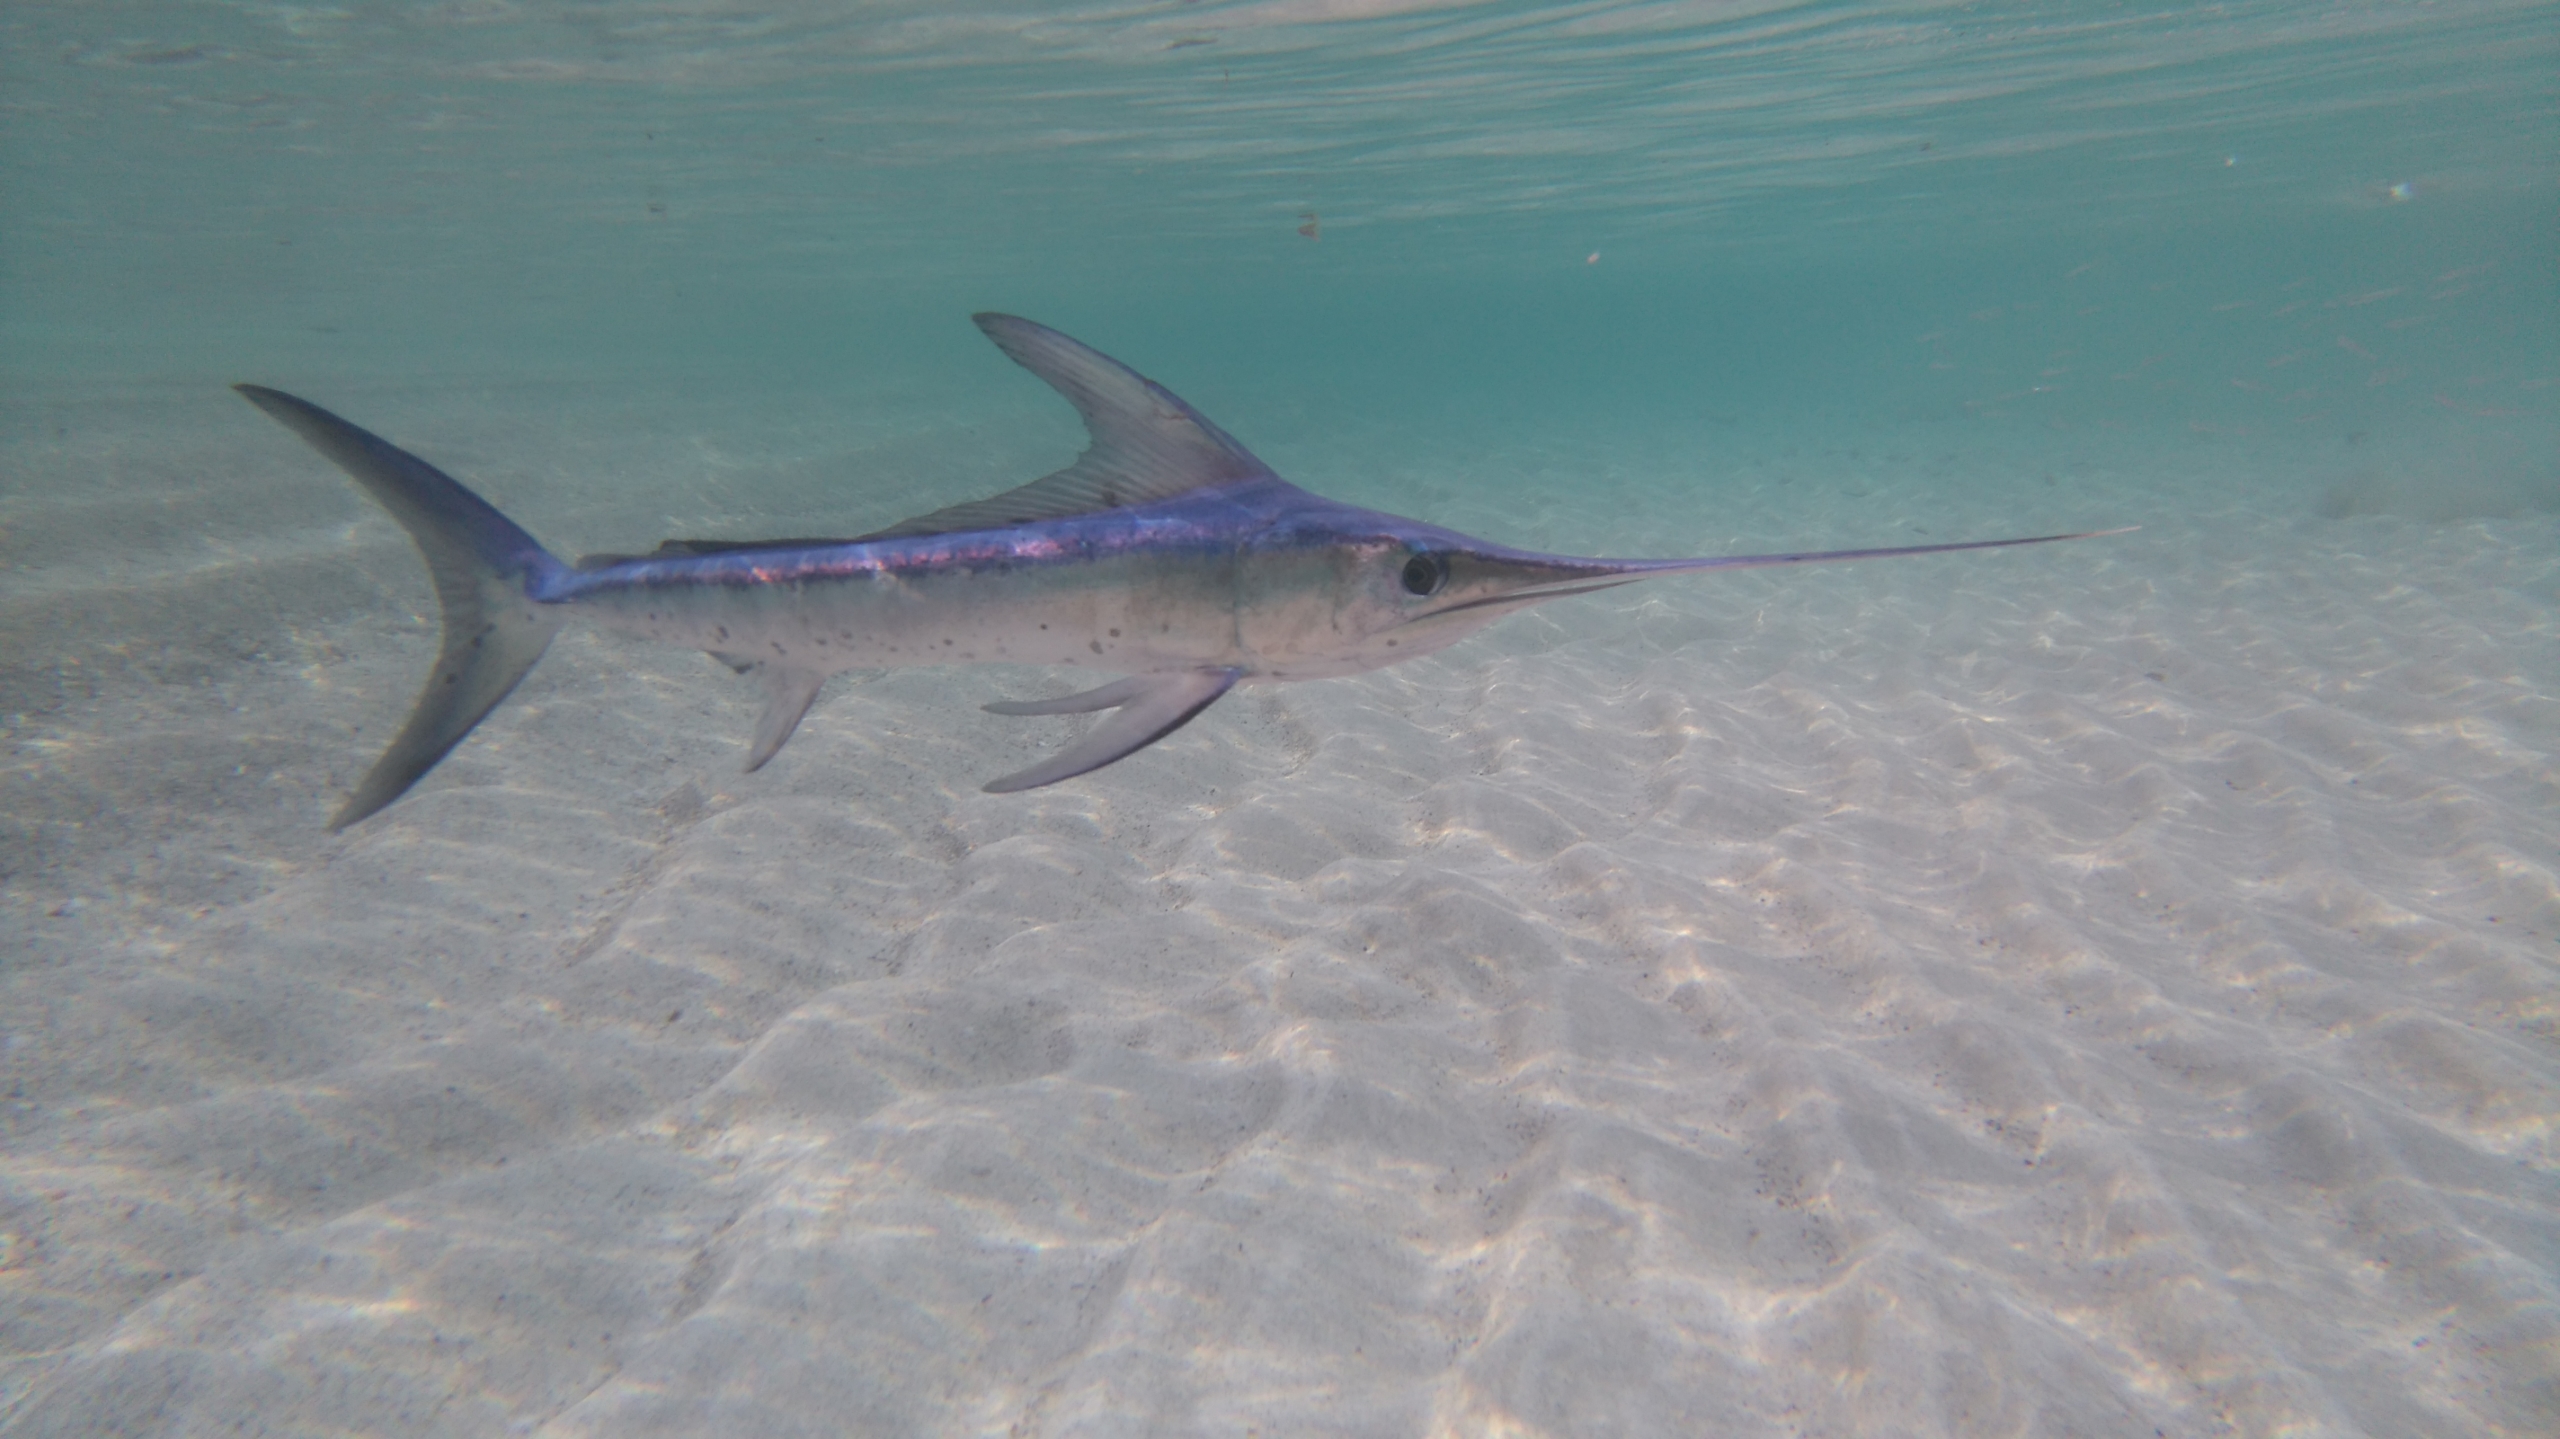 A photo of a swordfish swimming above sand in shallow water.